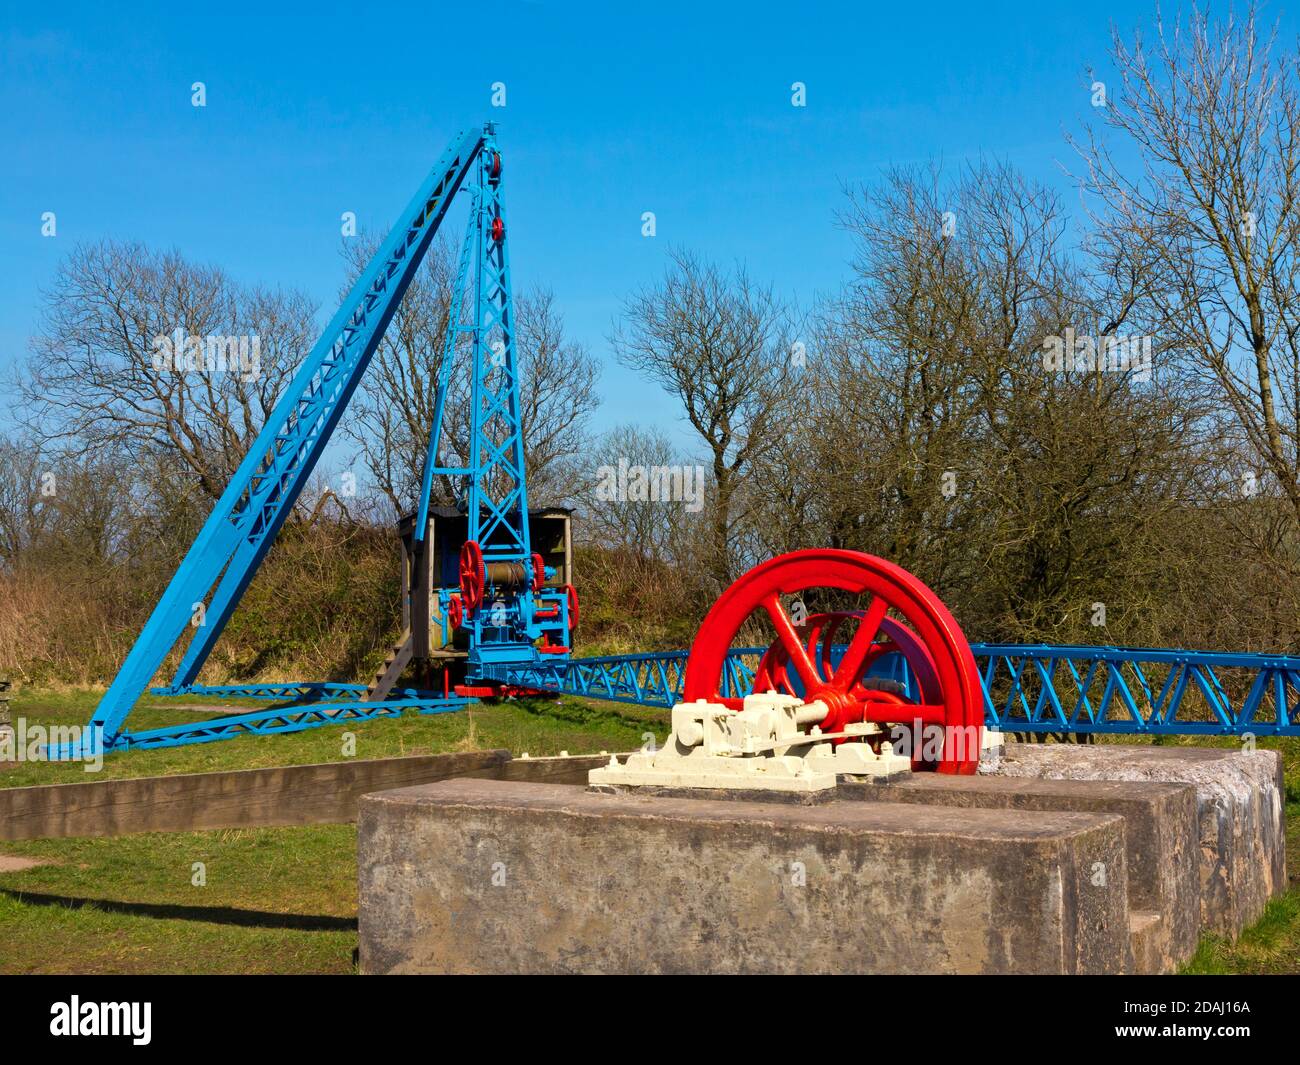 Old quarrying equipment on display at Teggs Nose Country Park near Macclesfield in East Cheshire England UK Stock Photo